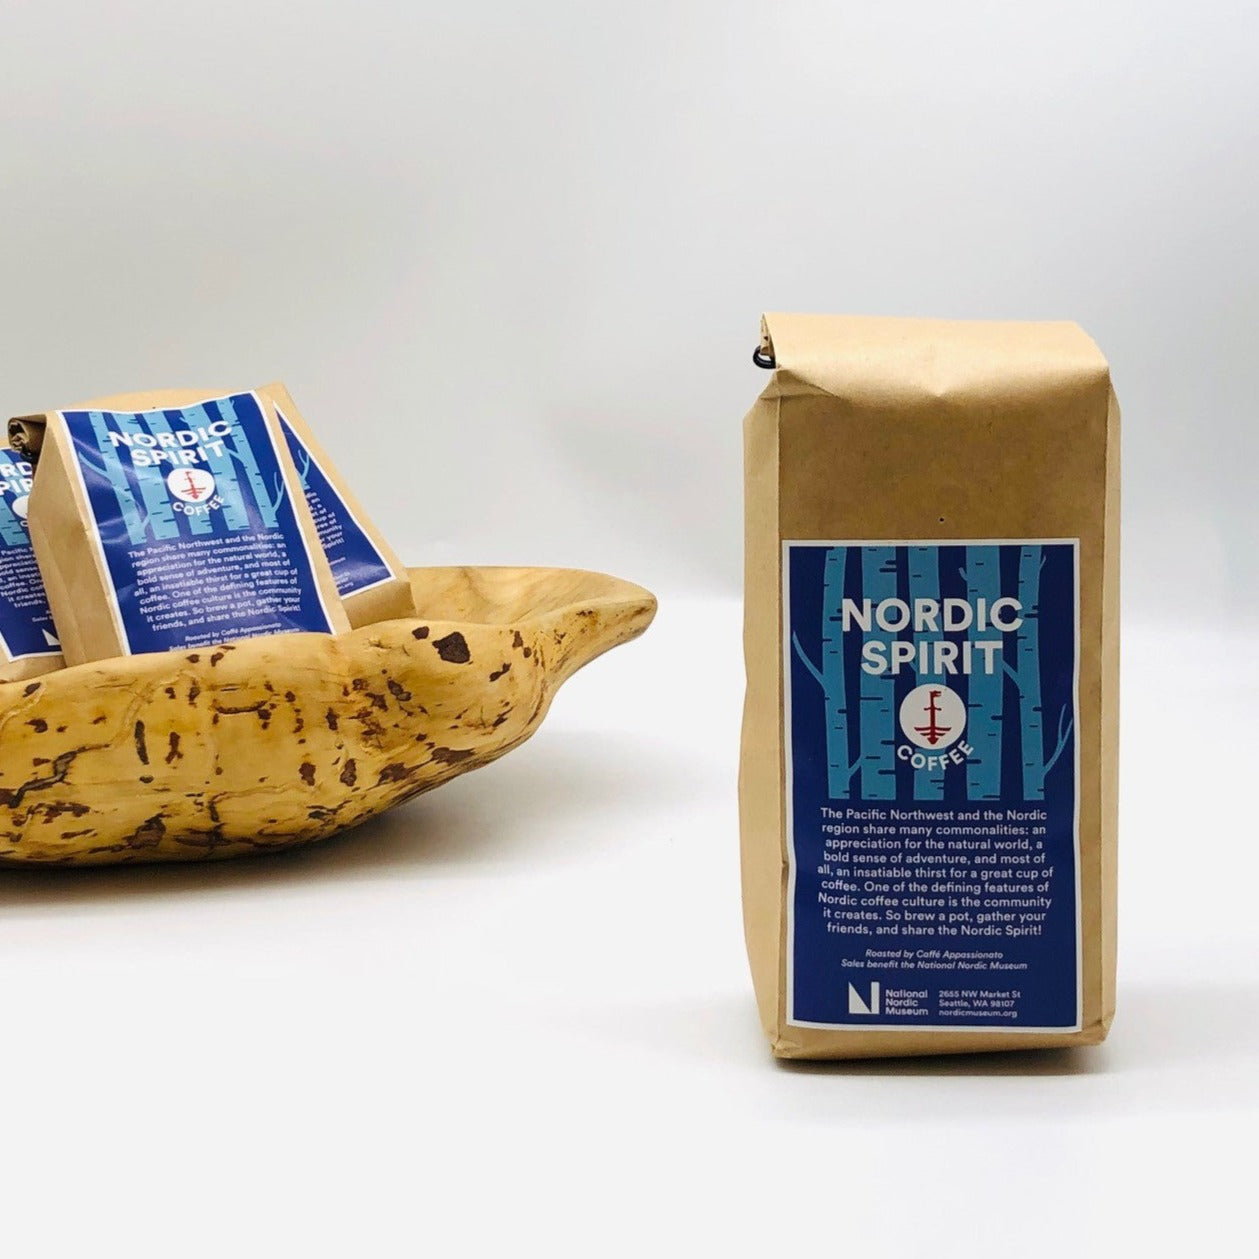 Brew a pot of Nordic Spirit! This dark roast was created especially for the National Nordic Museum by Seattle's Caffe Appassionato coffee roastery. Dark Coffee